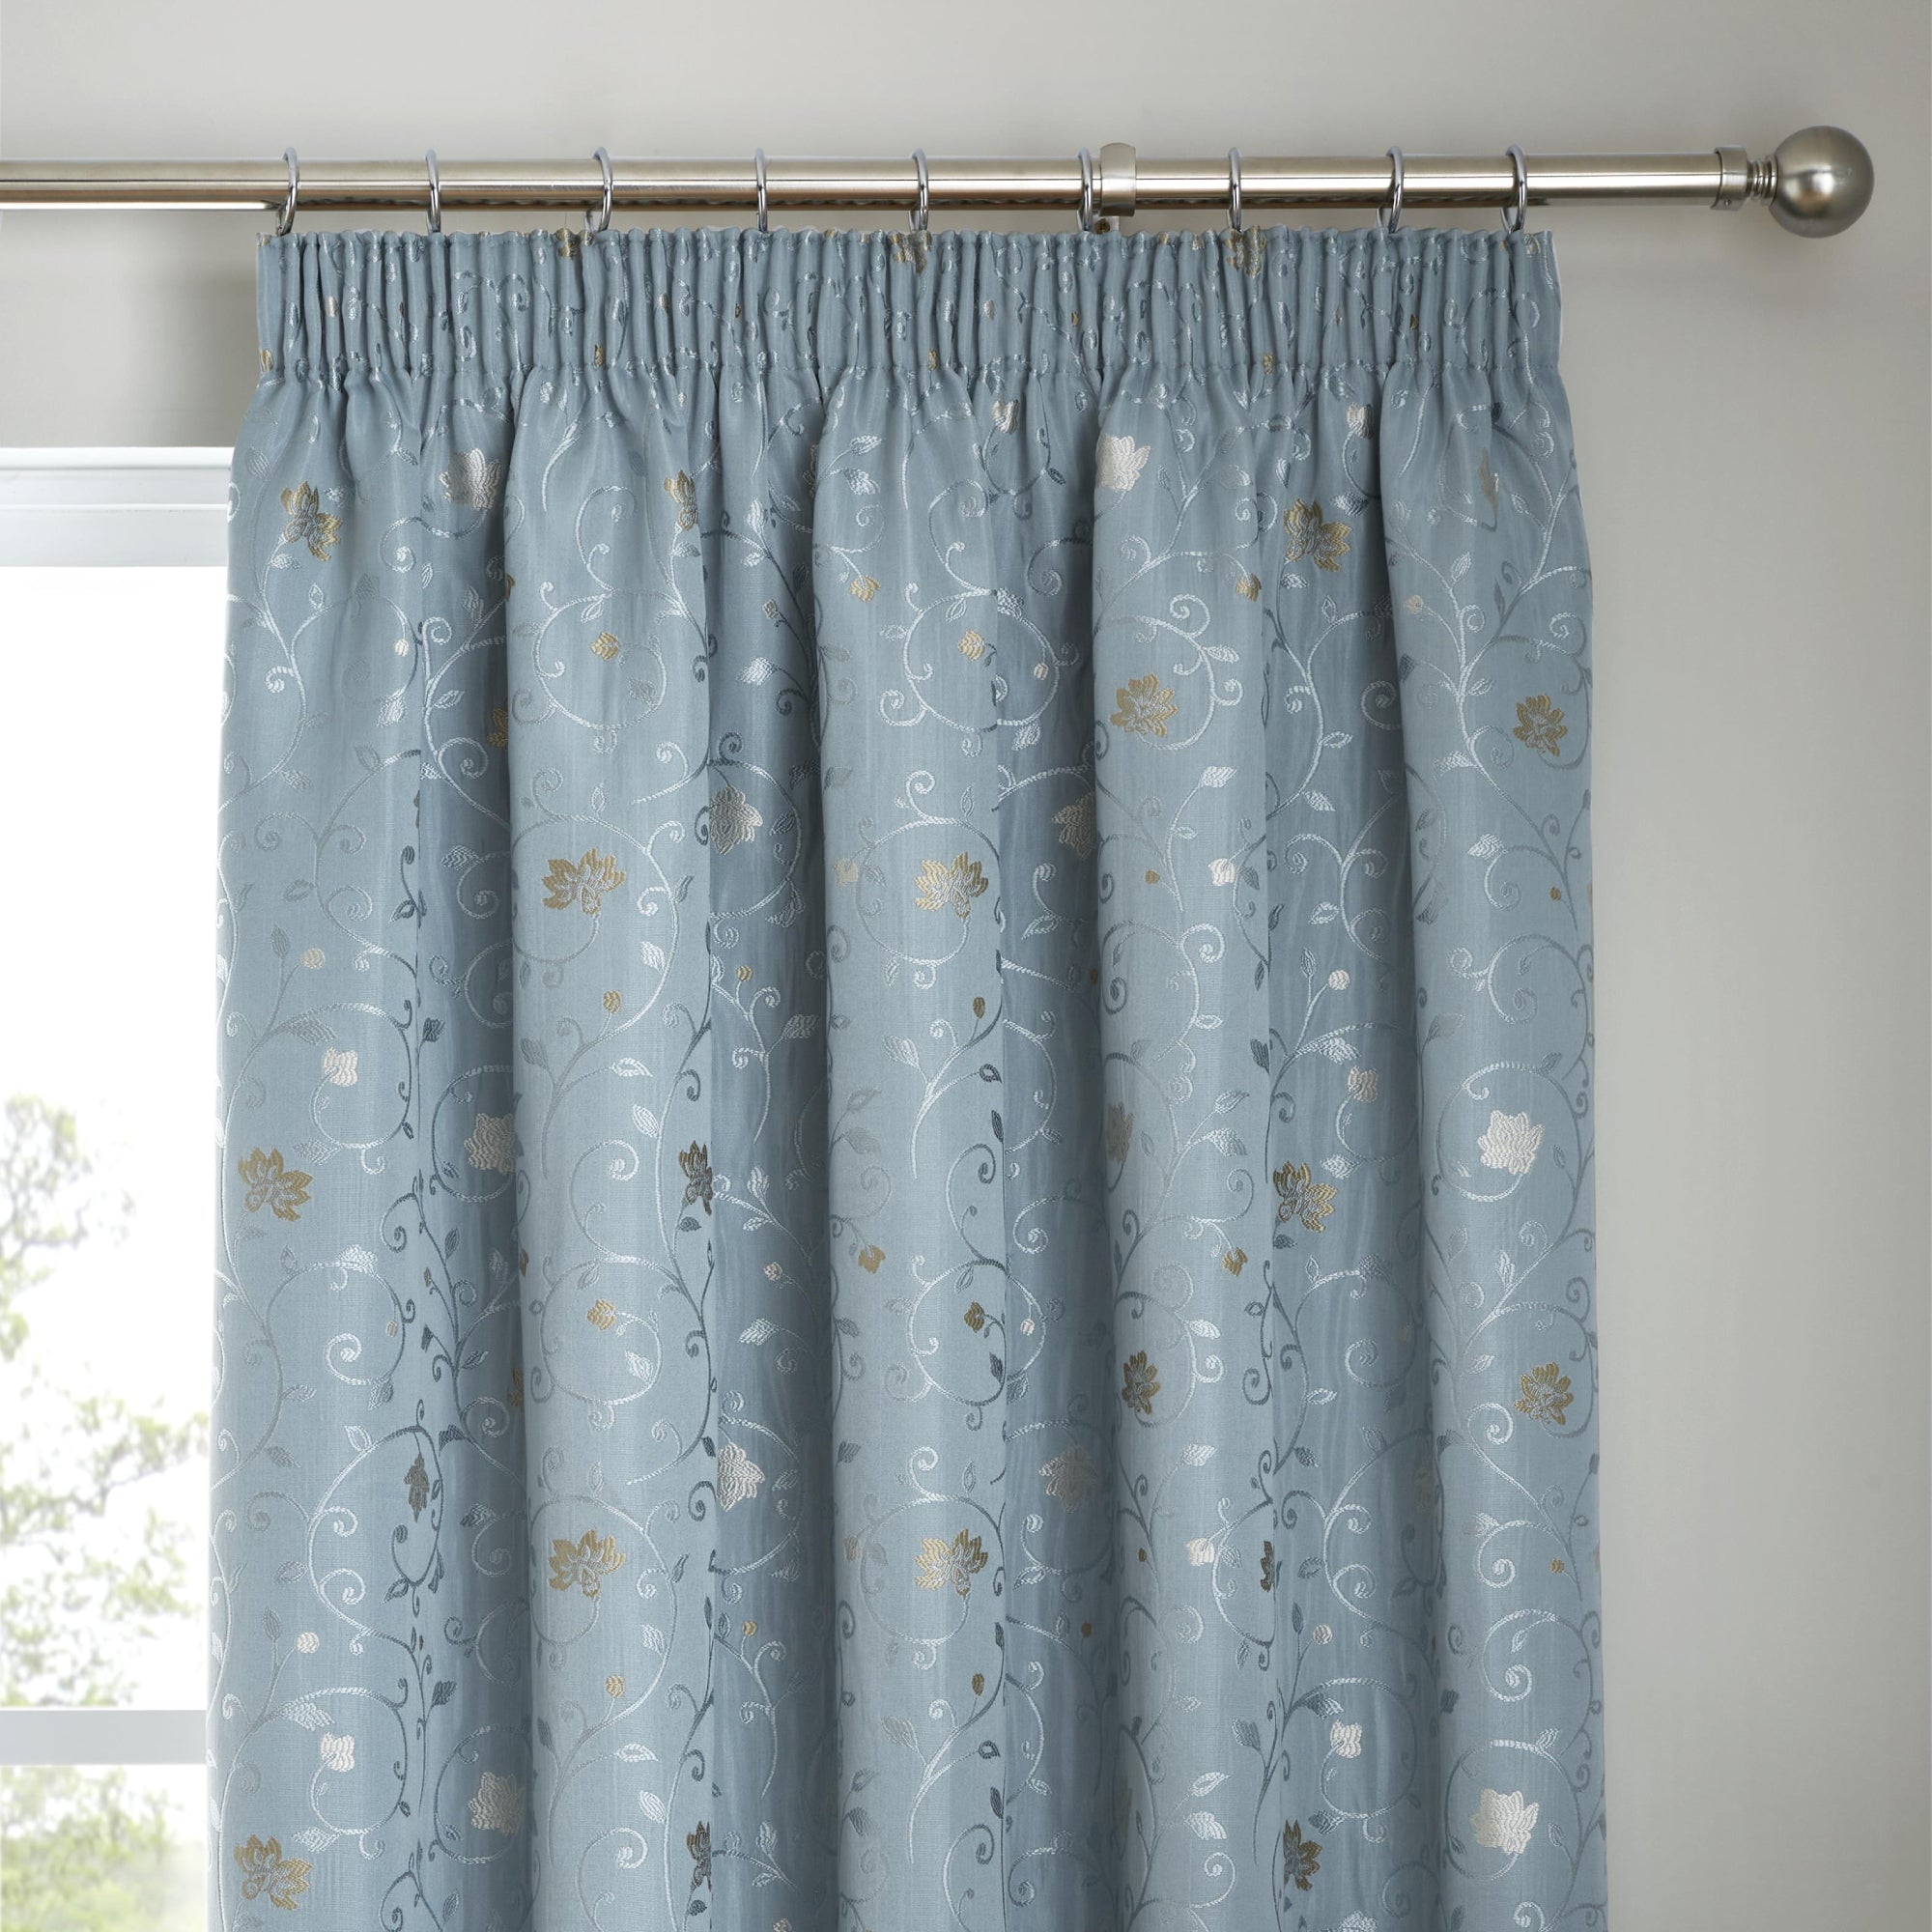 Pair of Pencil Pleat Curtains Renata by Curtina in Duckegg